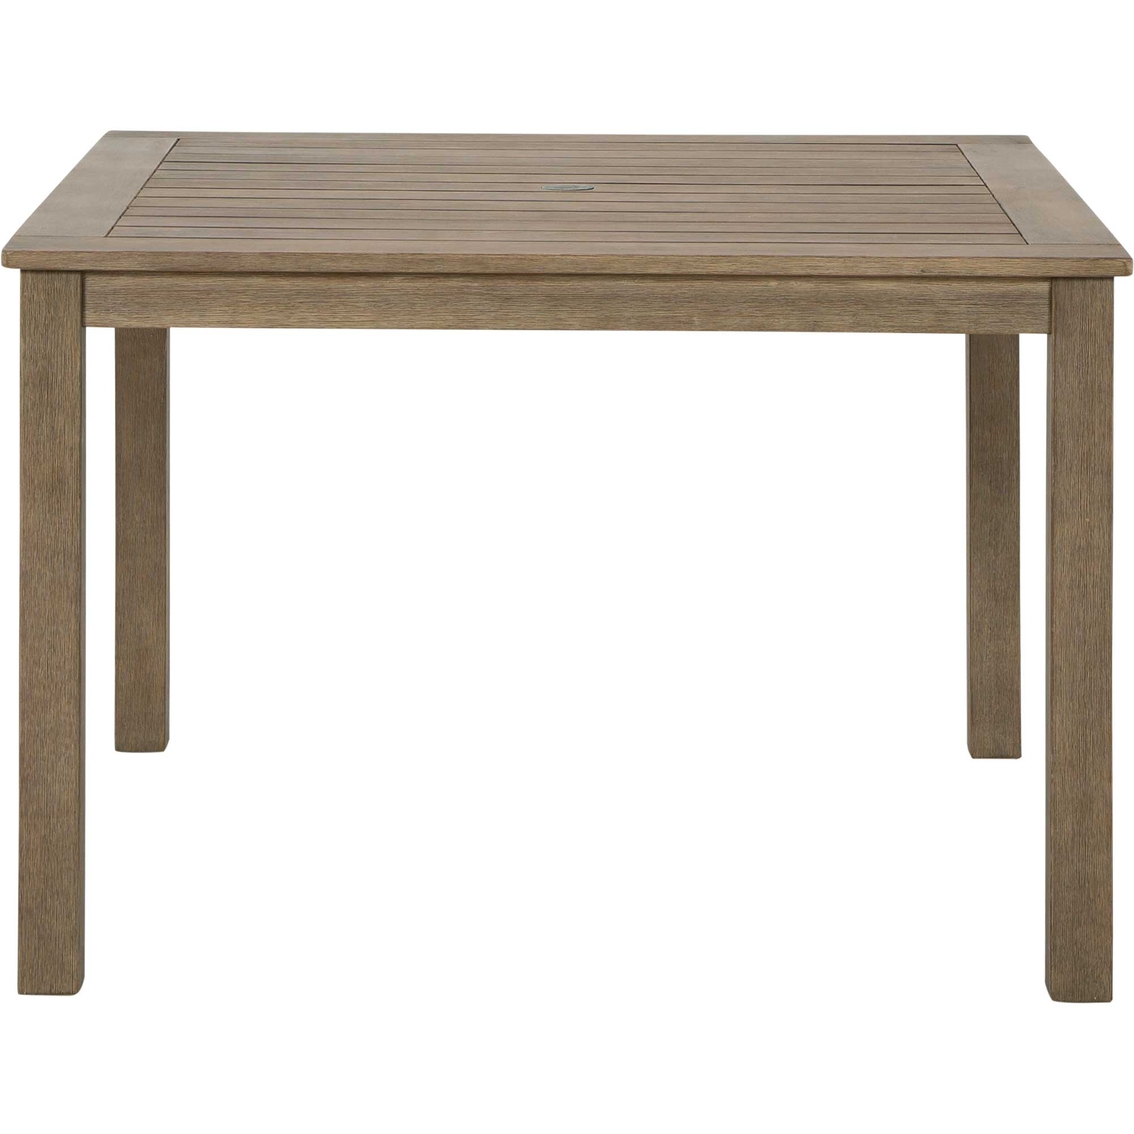 Signature Design by Ashley Aria Plains Outdoor Dining Table - Image 2 of 5